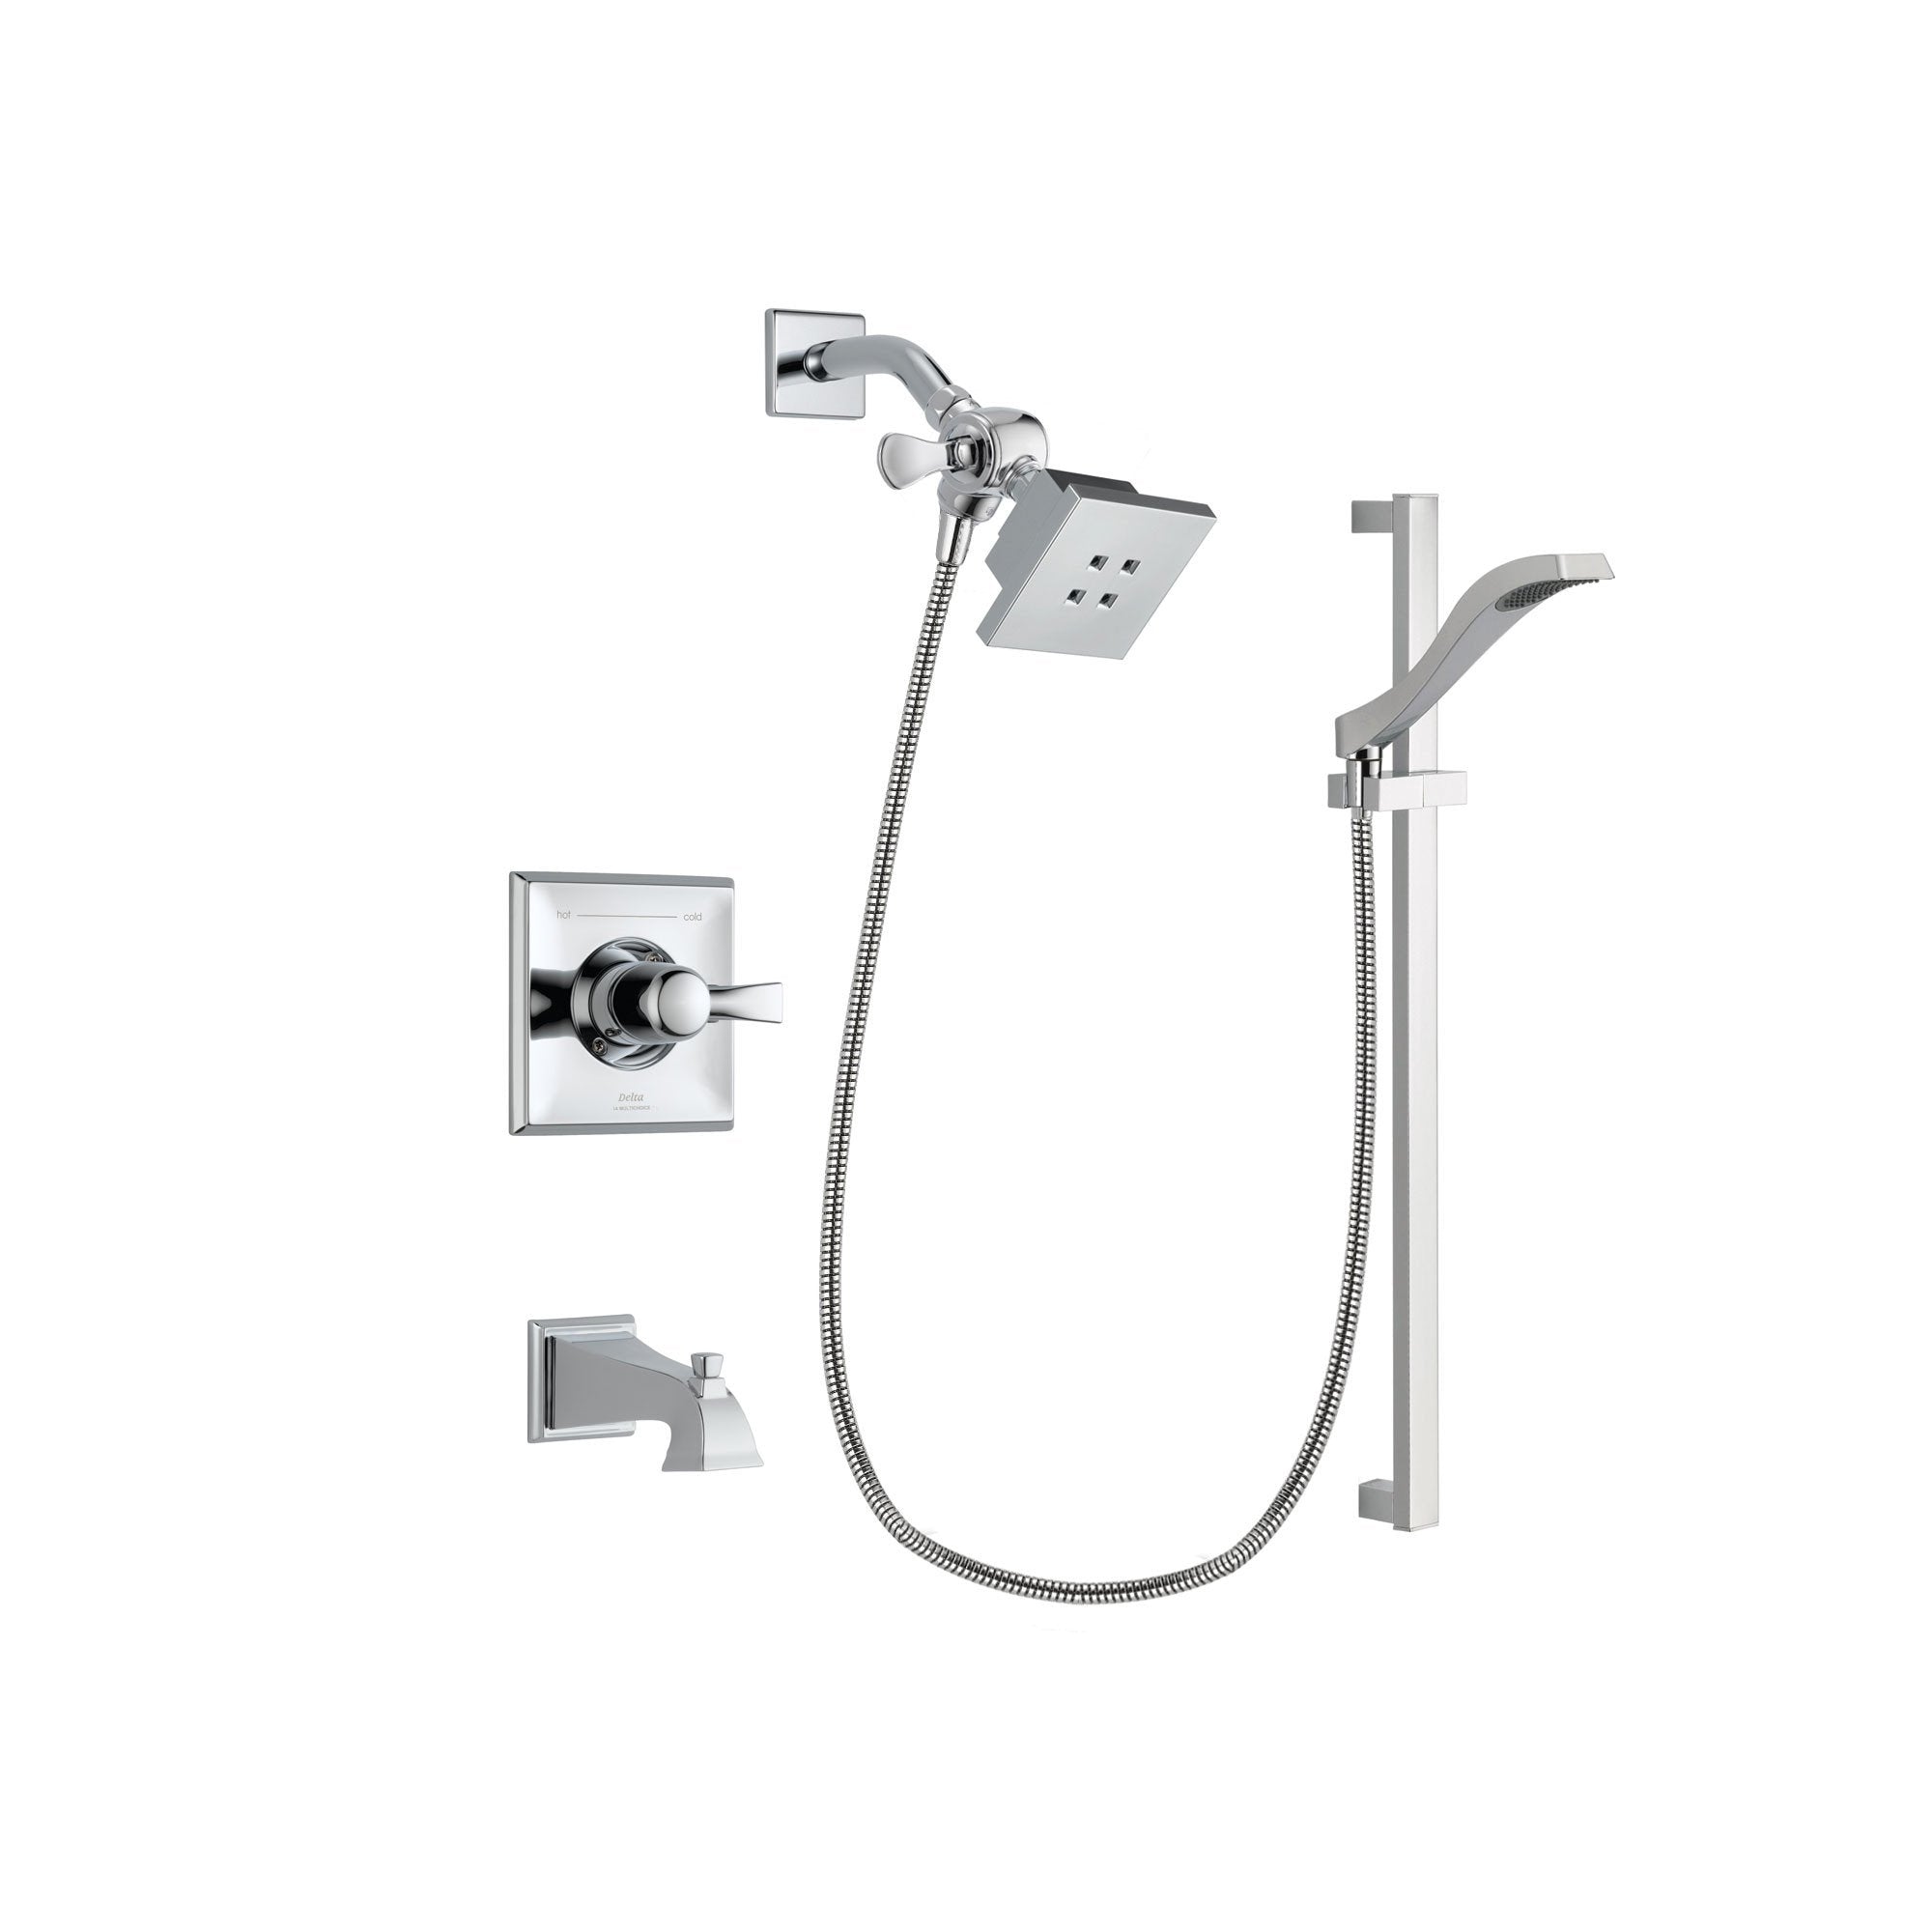 Delta Dryden Chrome Finish Tub and Shower Faucet System Package with Square Showerhead and Wall Mount Slide Bar with Handheld Shower Spray Includes Rough-in Valve and Tub Spout DSP0151V